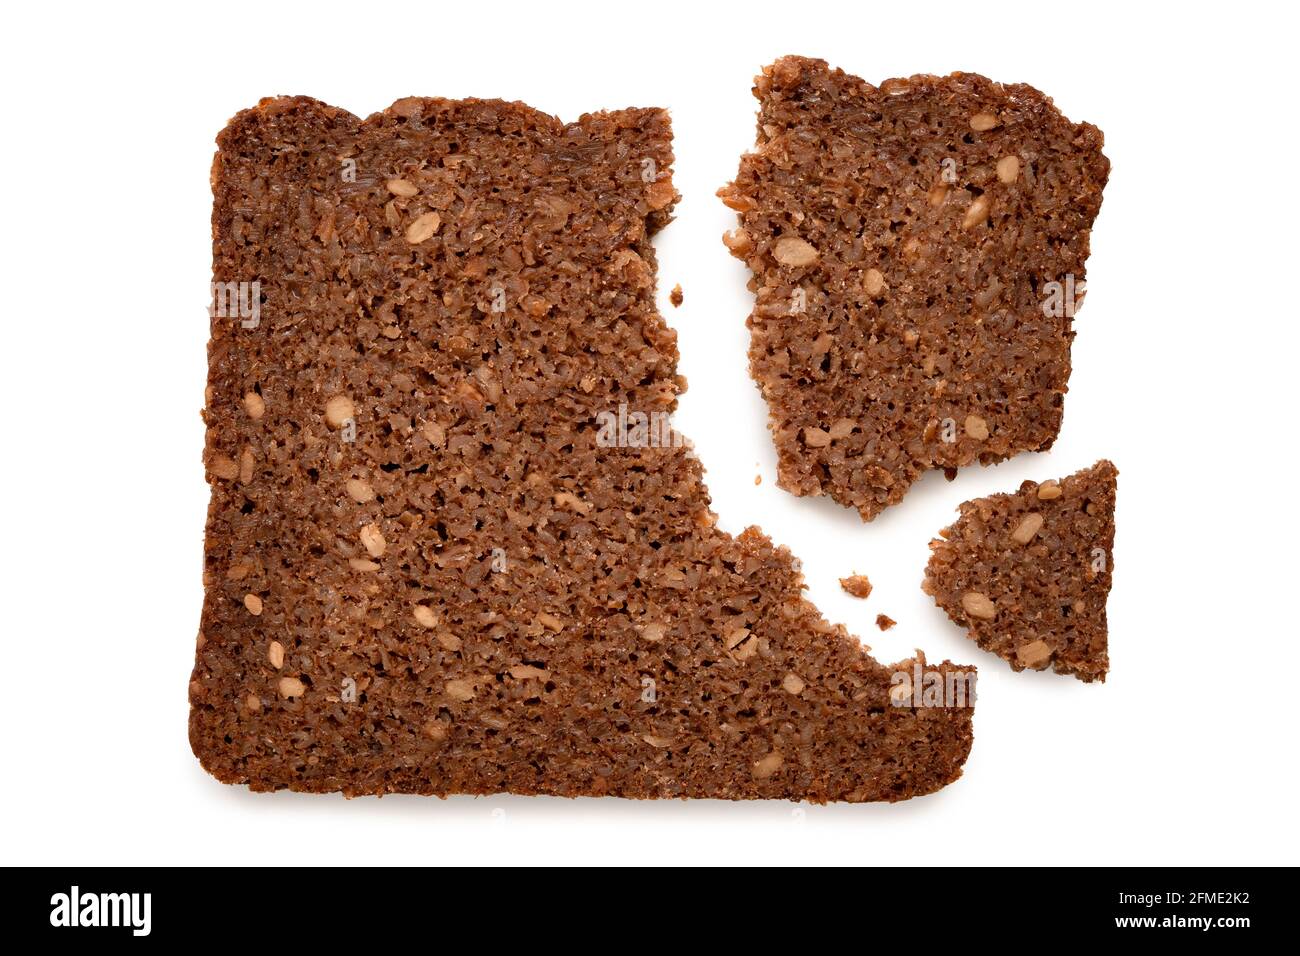 Broken slice of German health bread with sunflower seeds isolated on white. Top view. Stock Photo